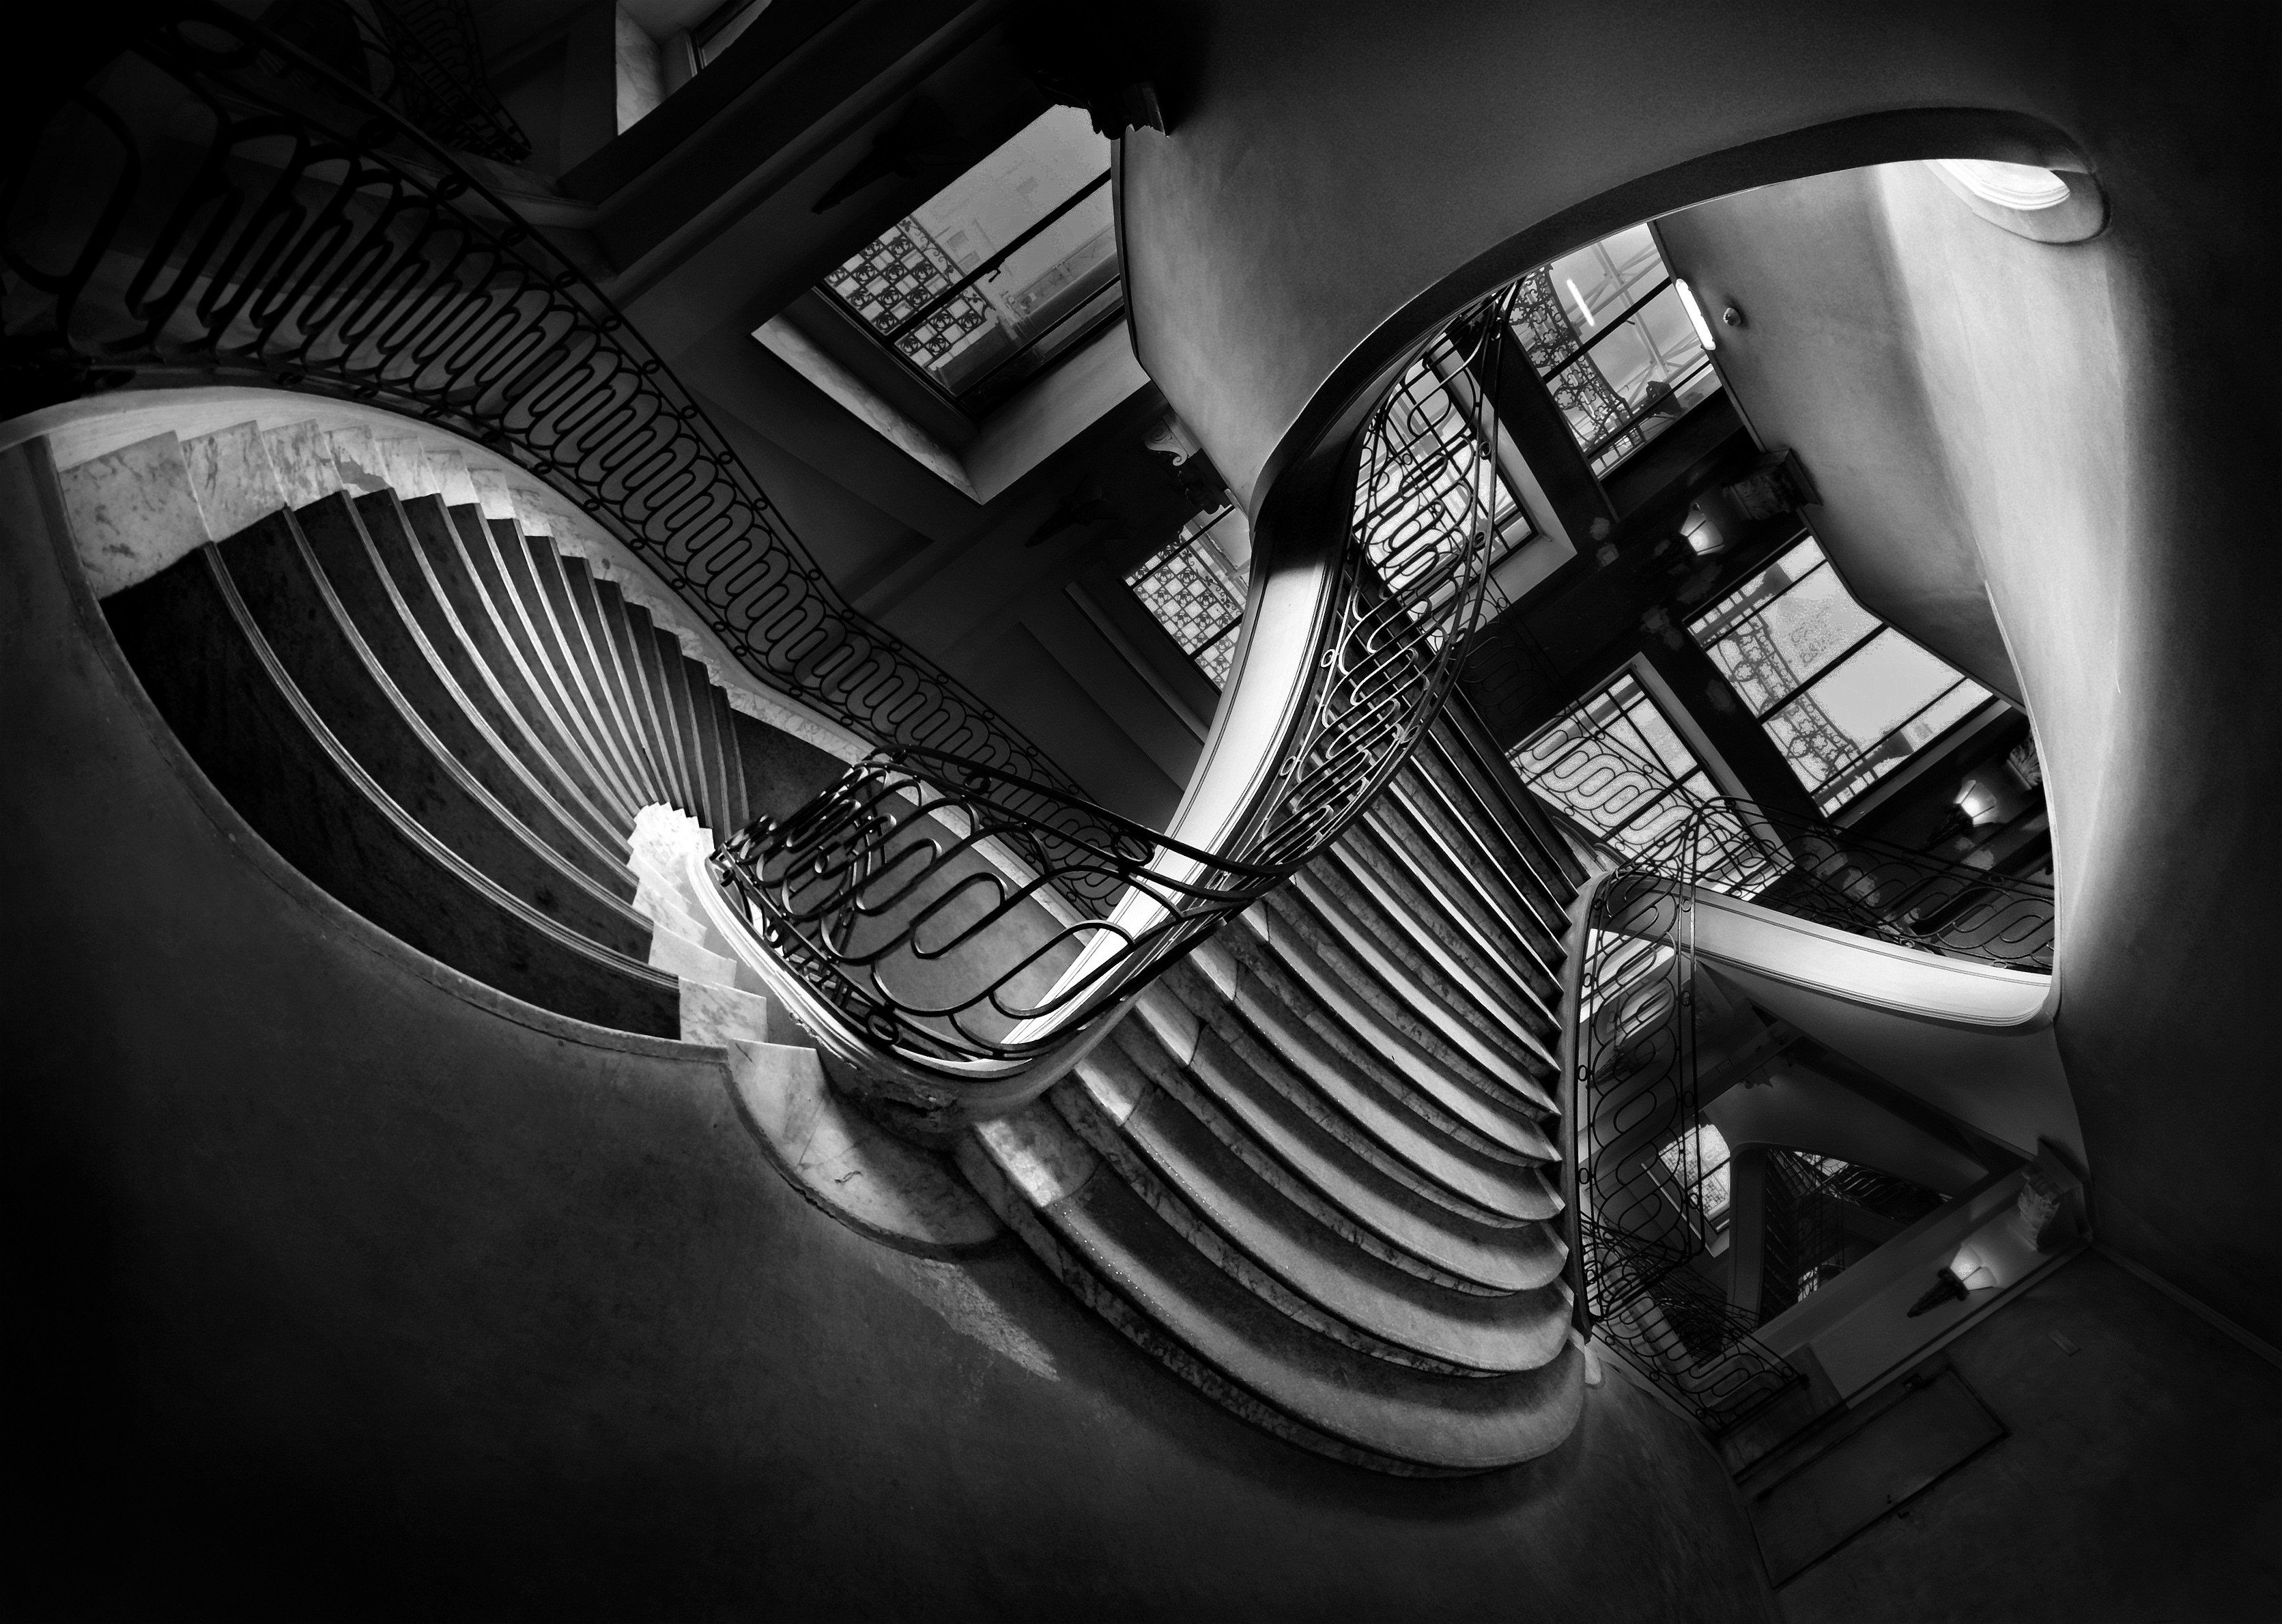 staircase, old, building, paris, france, europe, city, fly, flight, stairs, windows, surreal, panorama, px3, Endegor